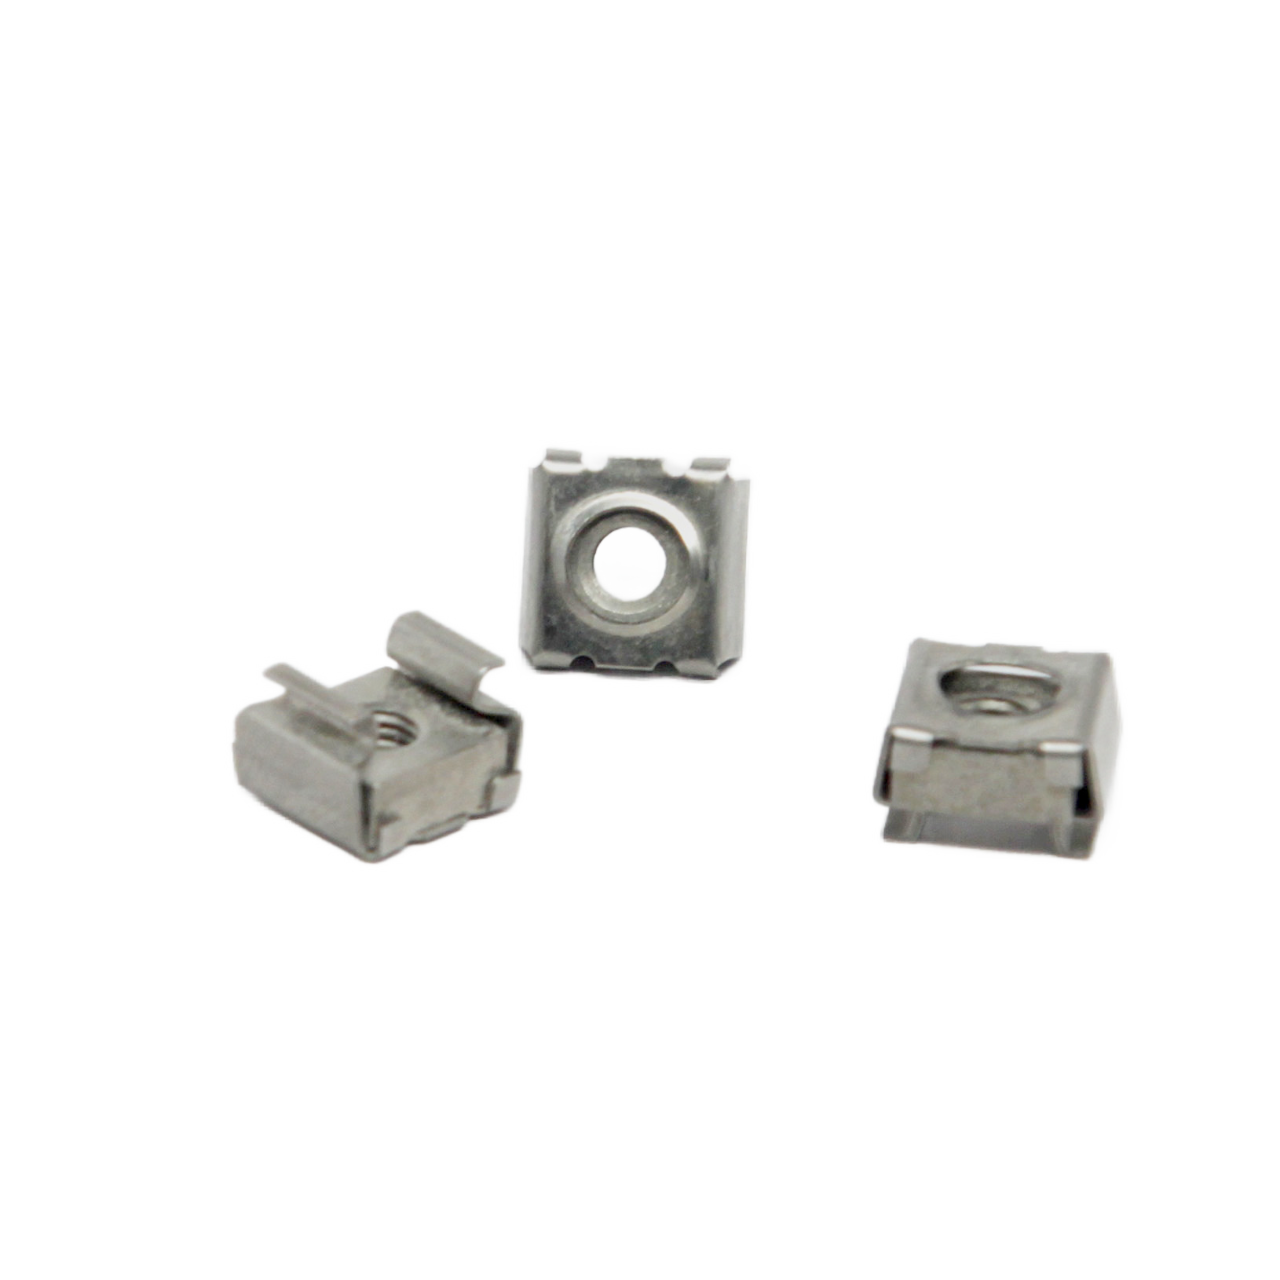 P2113 - Stainless Steel M5-.8 Cage Nut A2 for Intersan/AquaDesign Washfountain